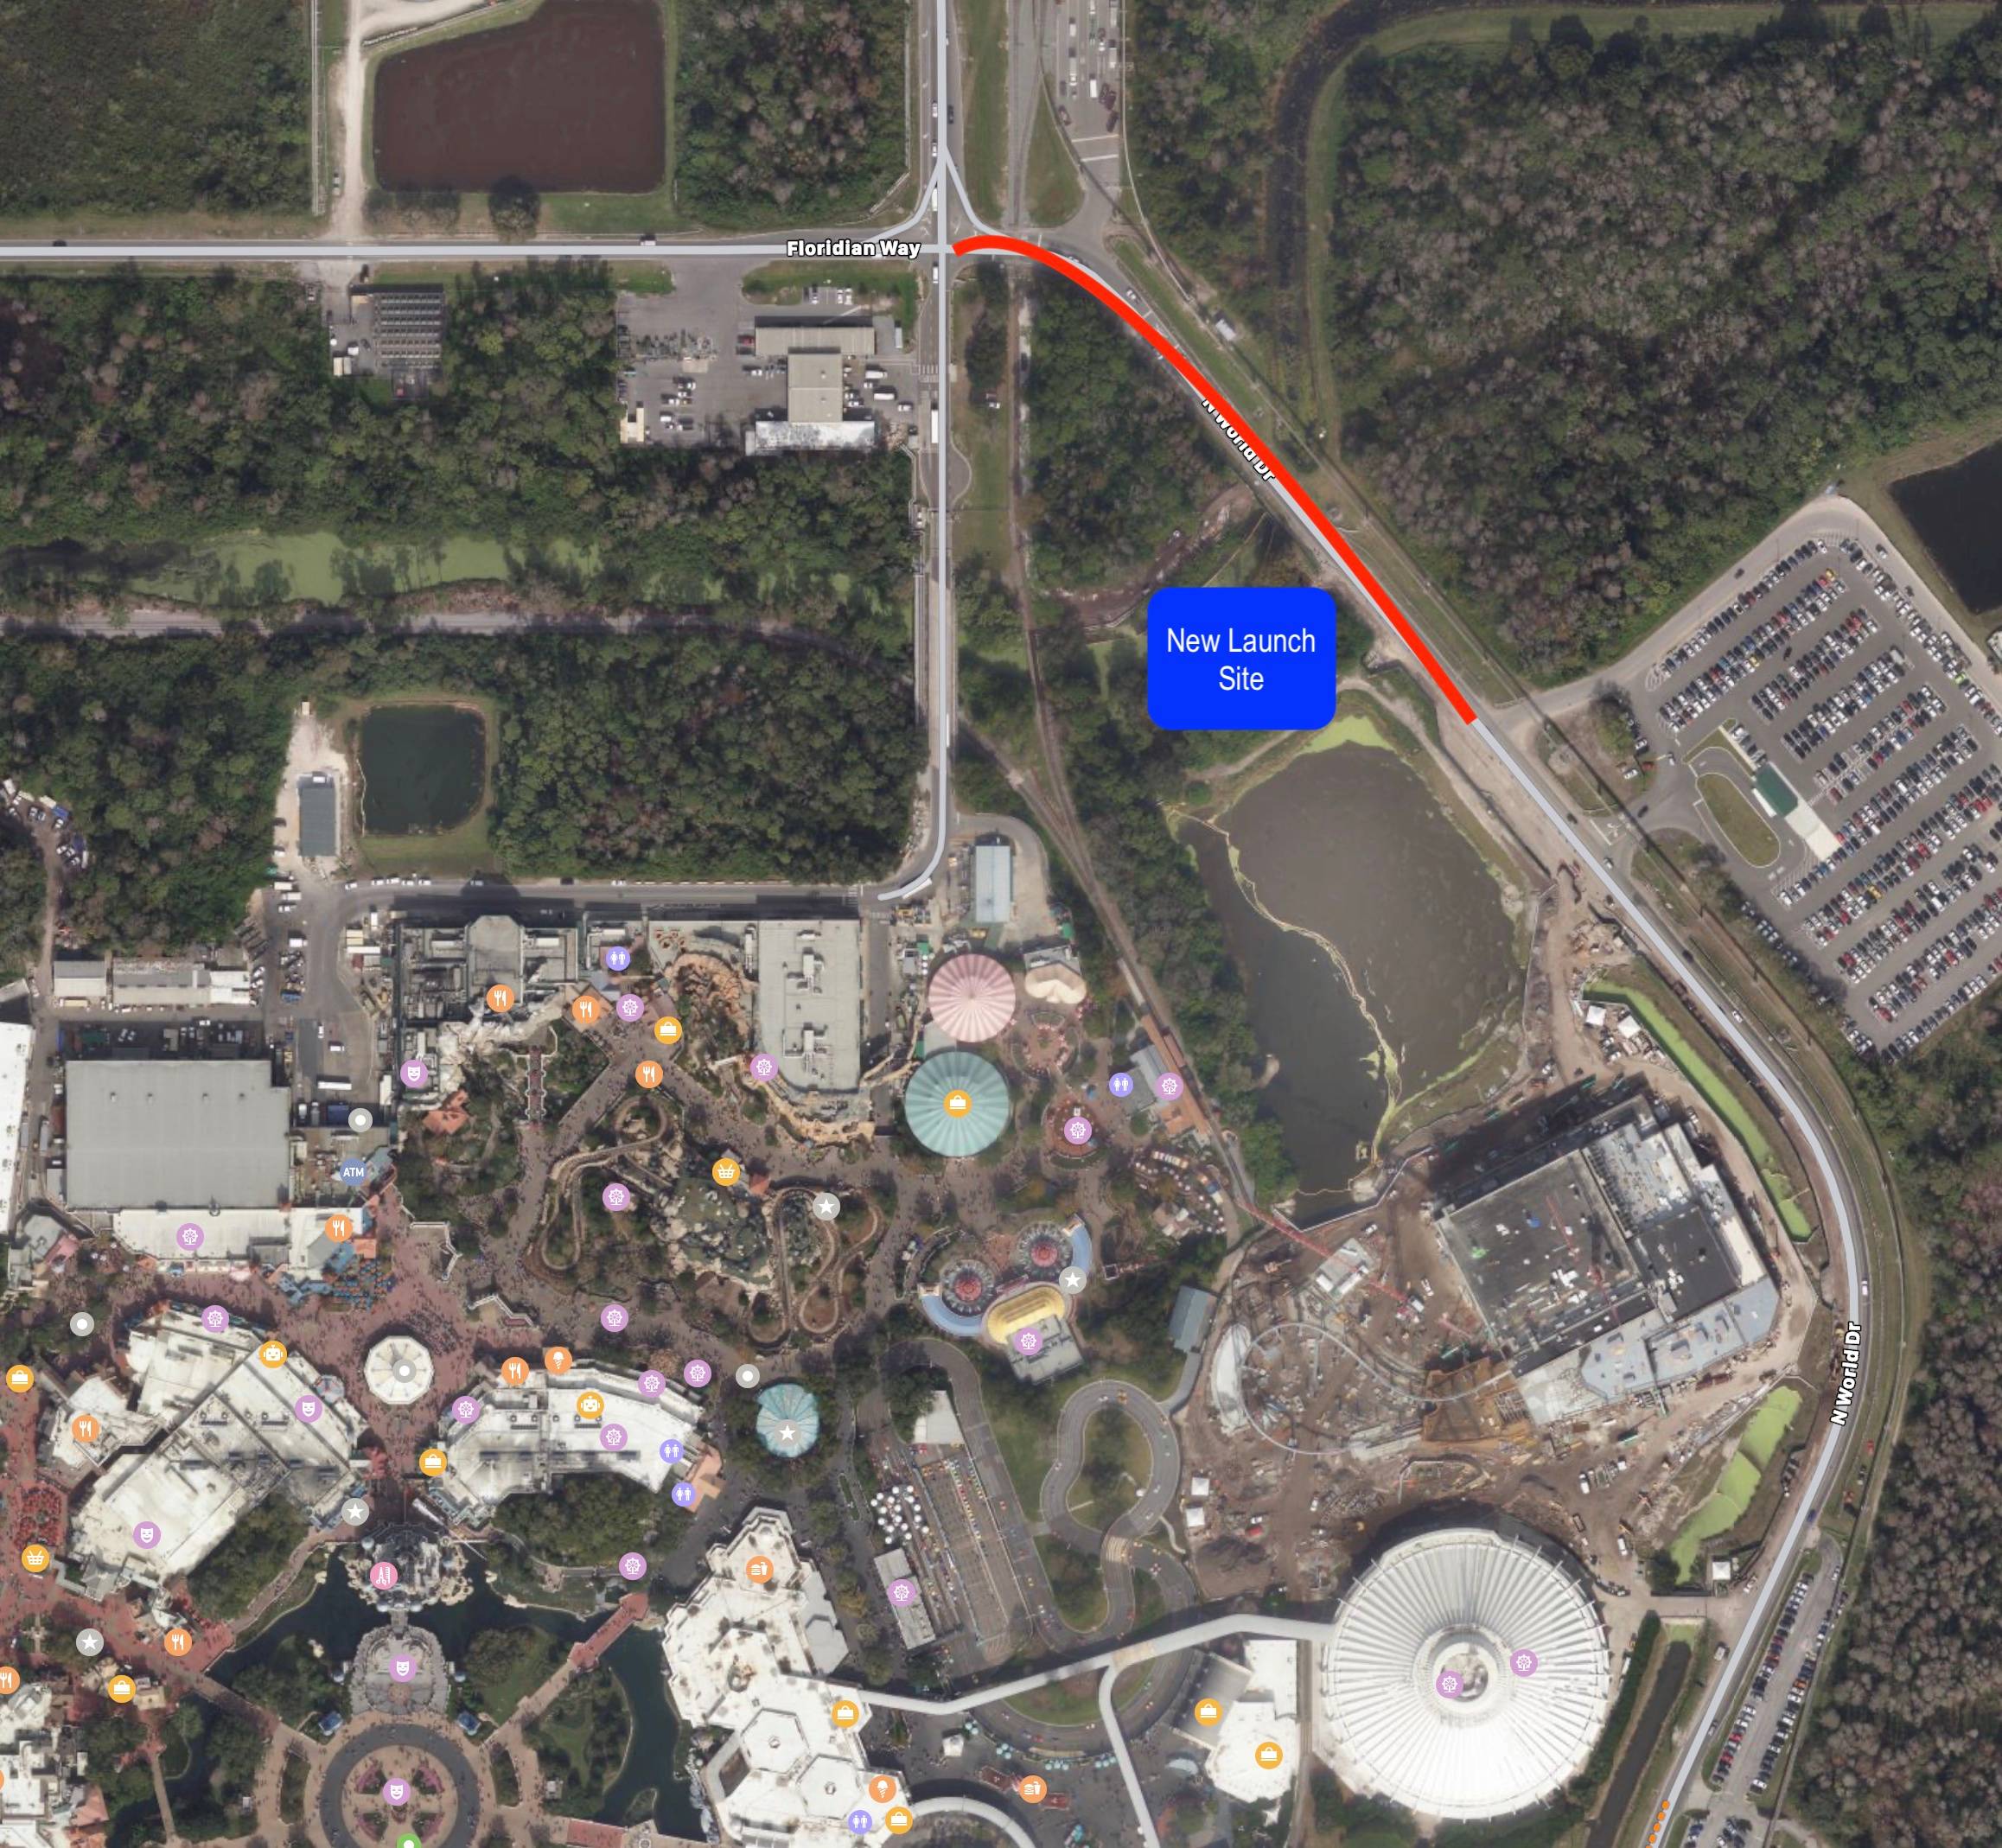 Week-long Road closure coming to World Drive close to proposed new Magic Kingdom firework launch site